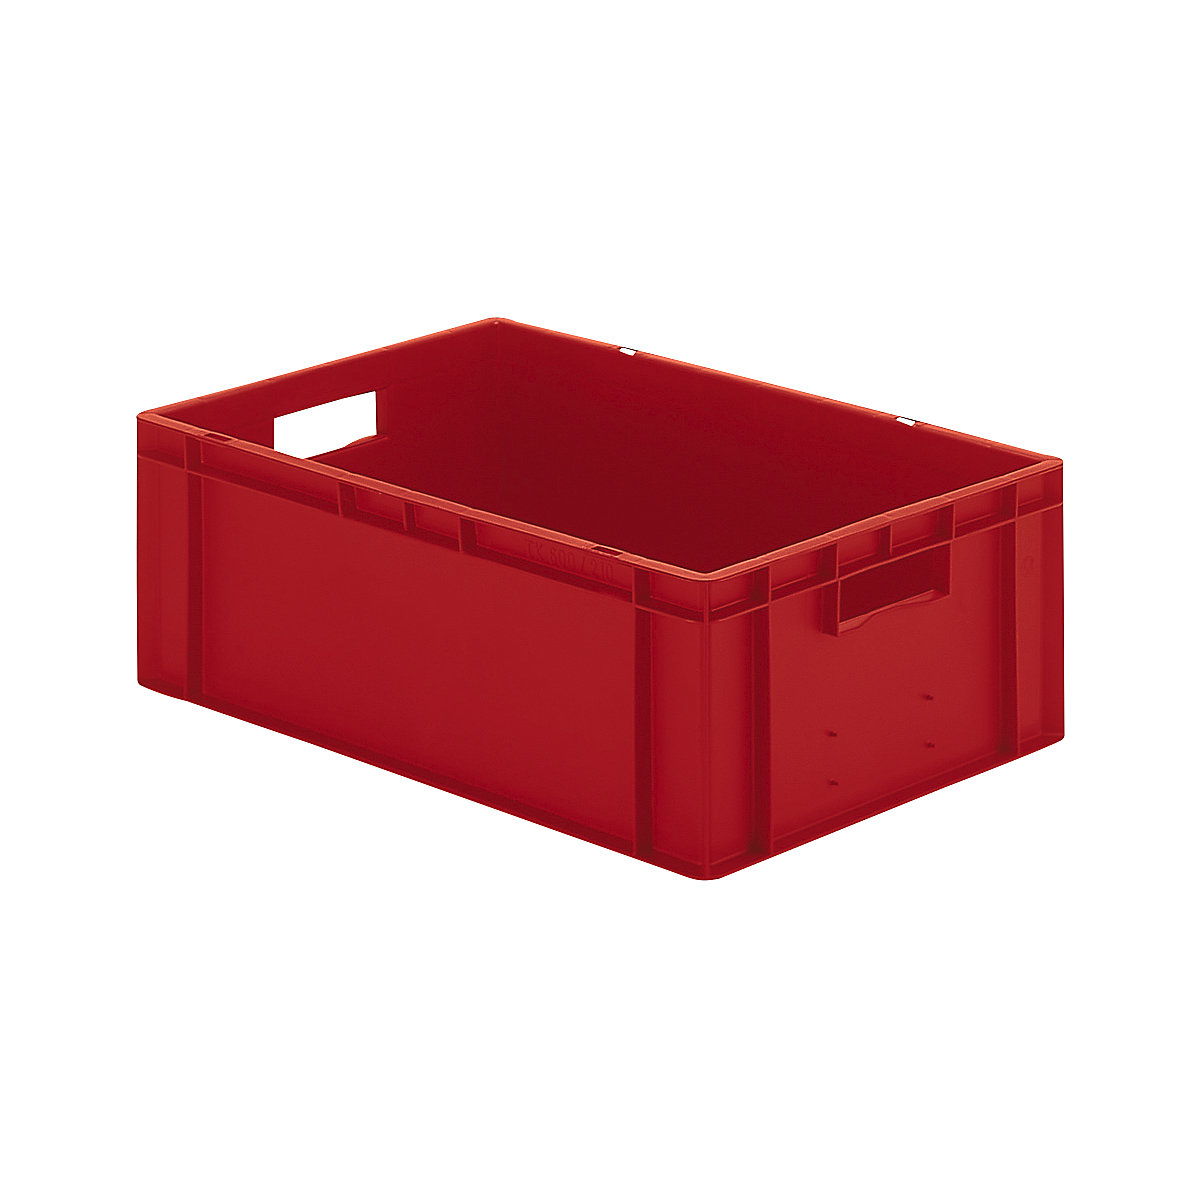 Euro stacking container, closed walls and base, LxWxH 600 x 400 x 210 mm, red, pack of 5